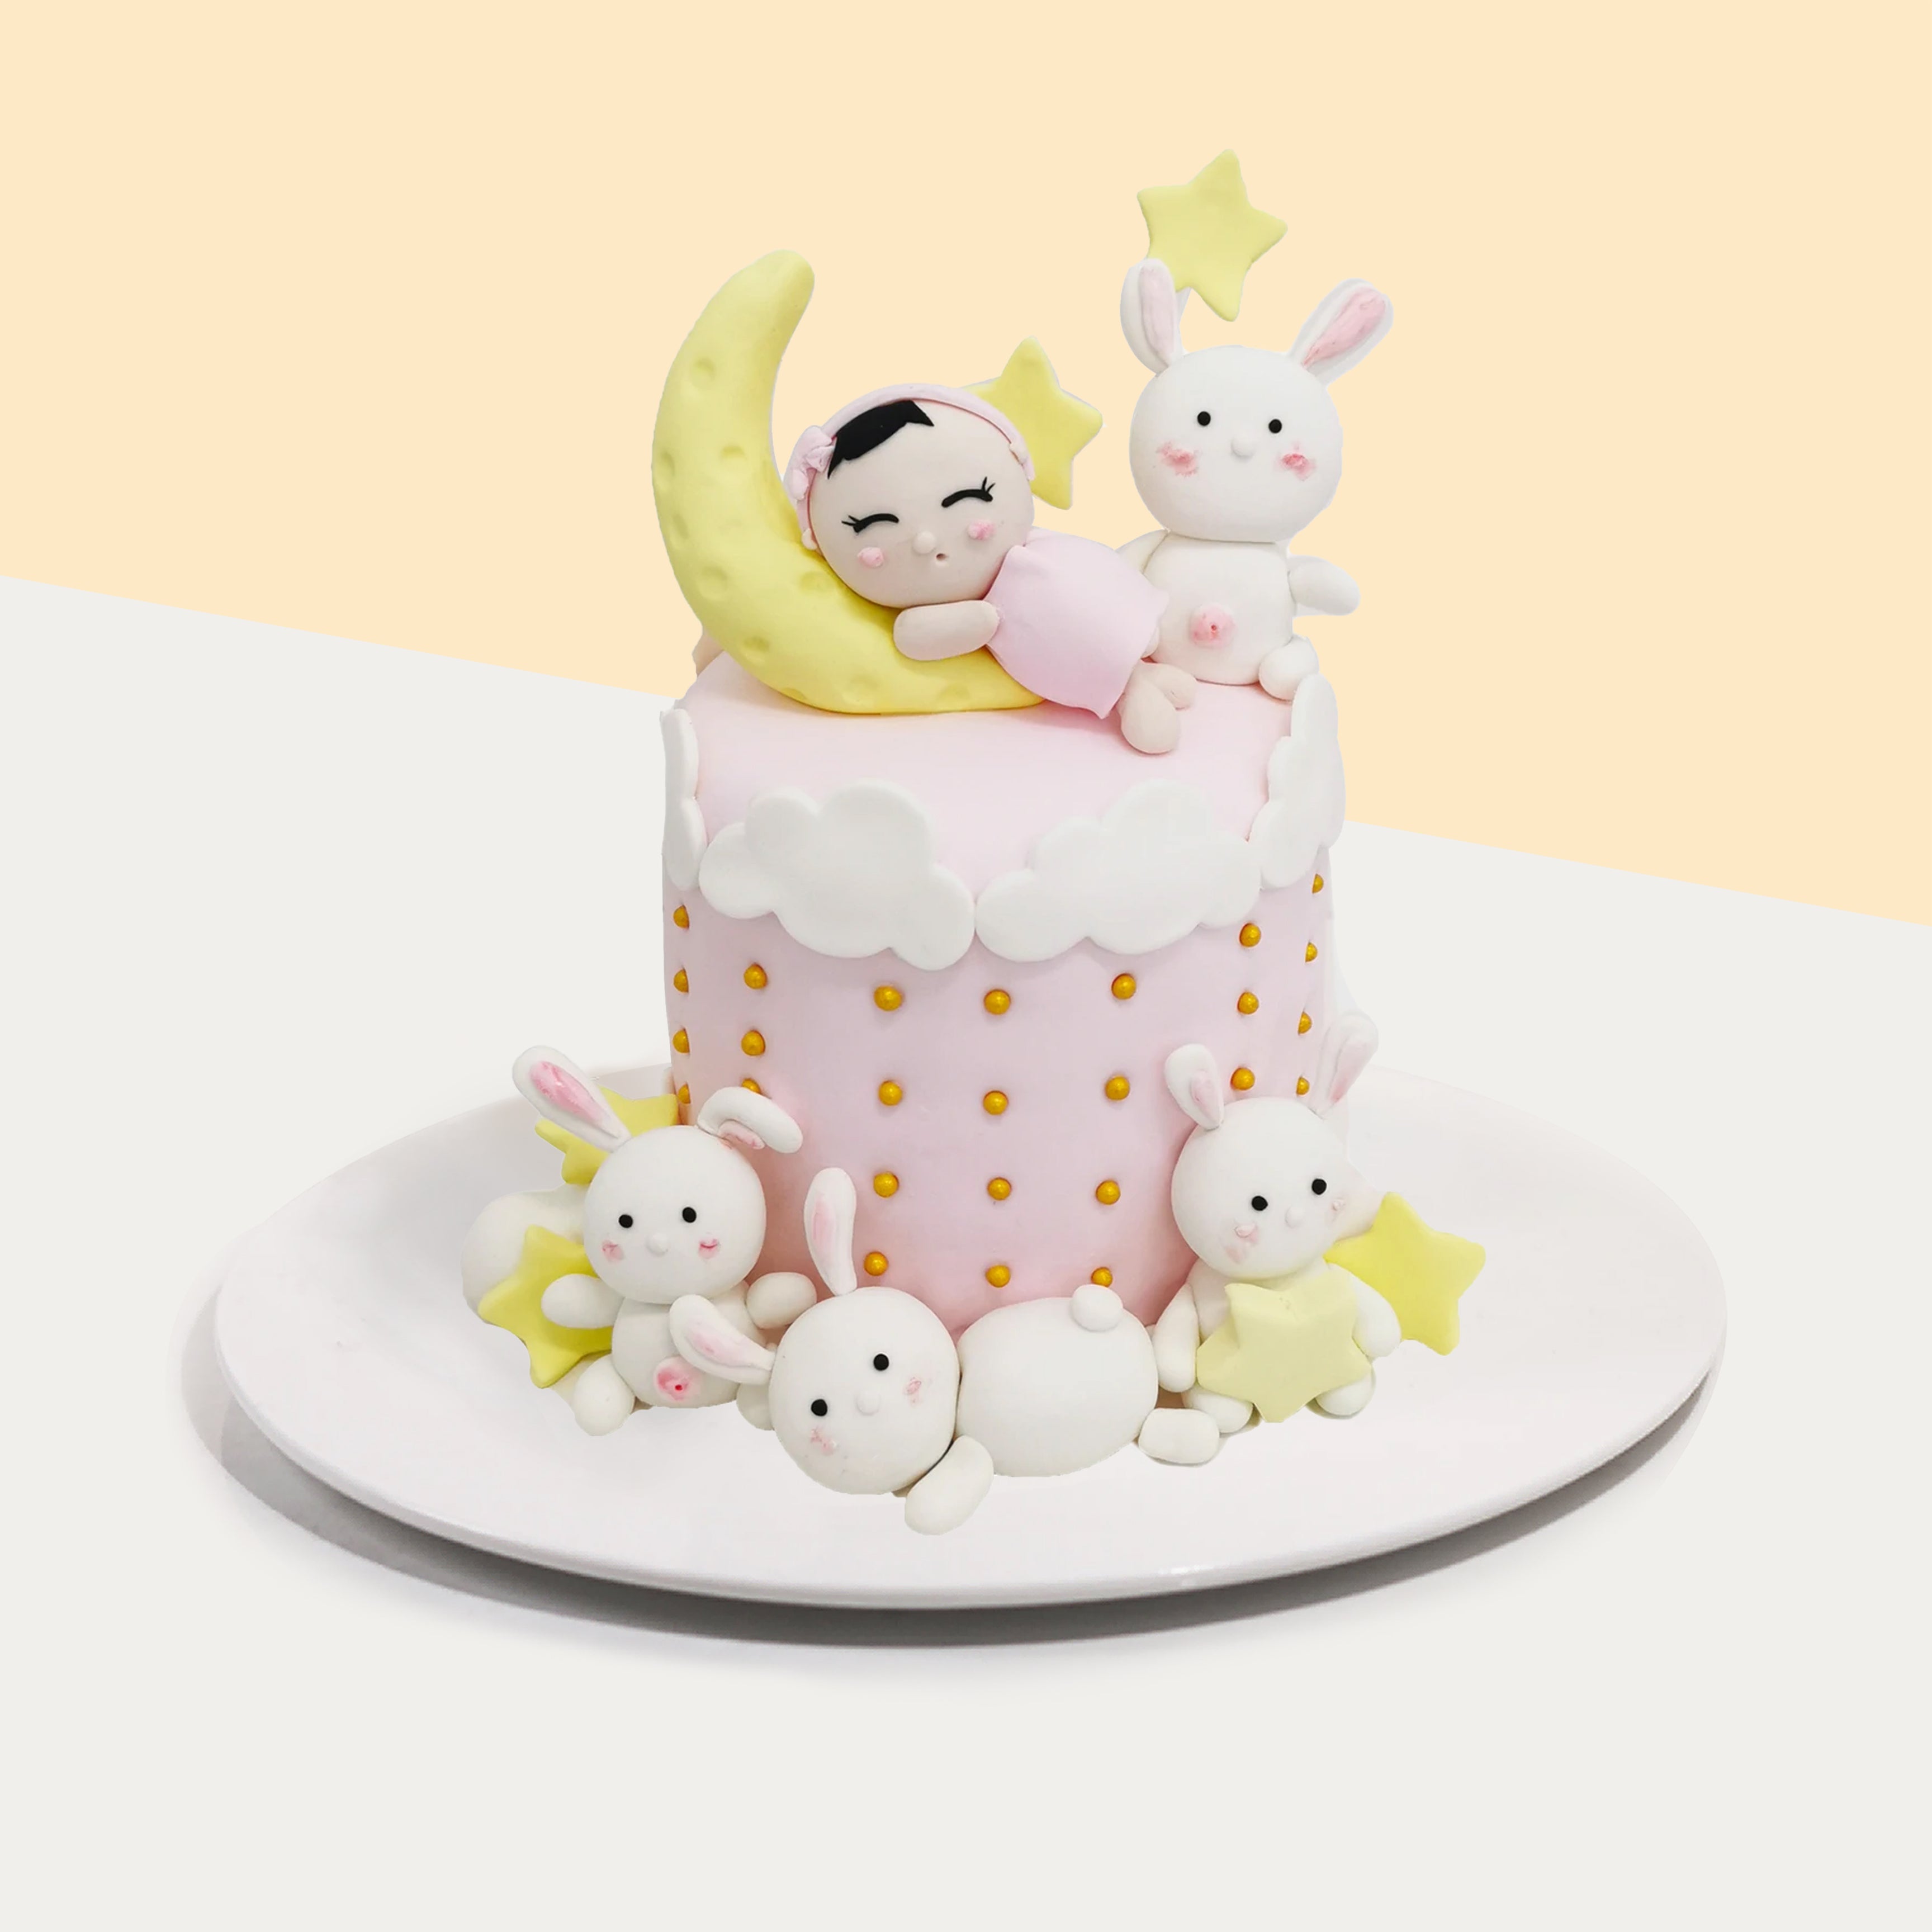 Baby and Moon Cake- A Video Tutorial - My Cake School